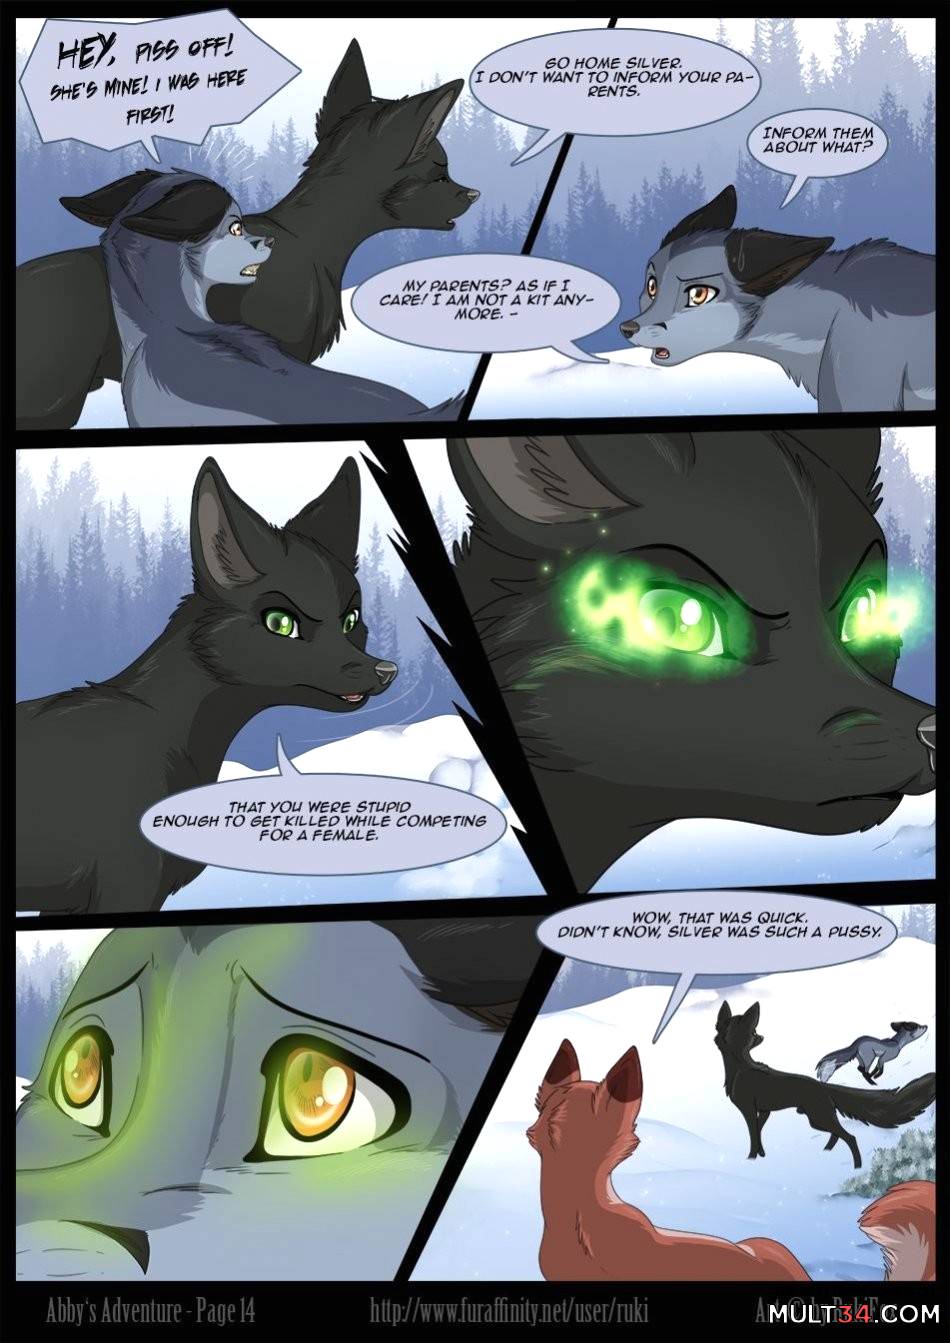 Abby's Adventure page 15